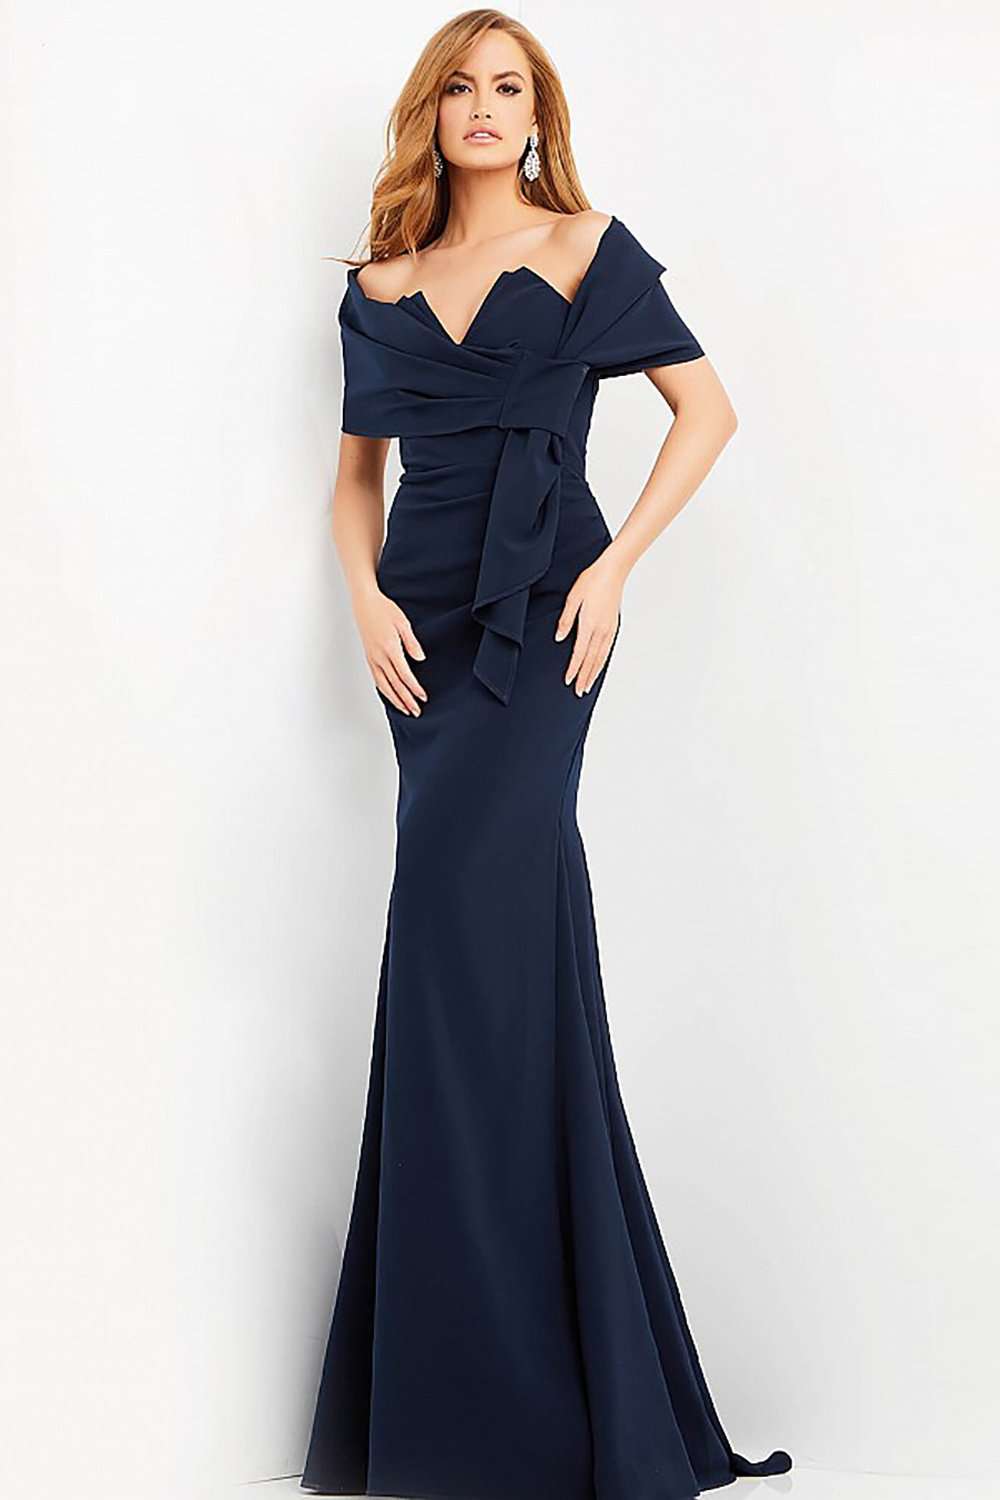 Ruched Evening Dress with Wrap Jovani 06403 - Morvarieds Fashion